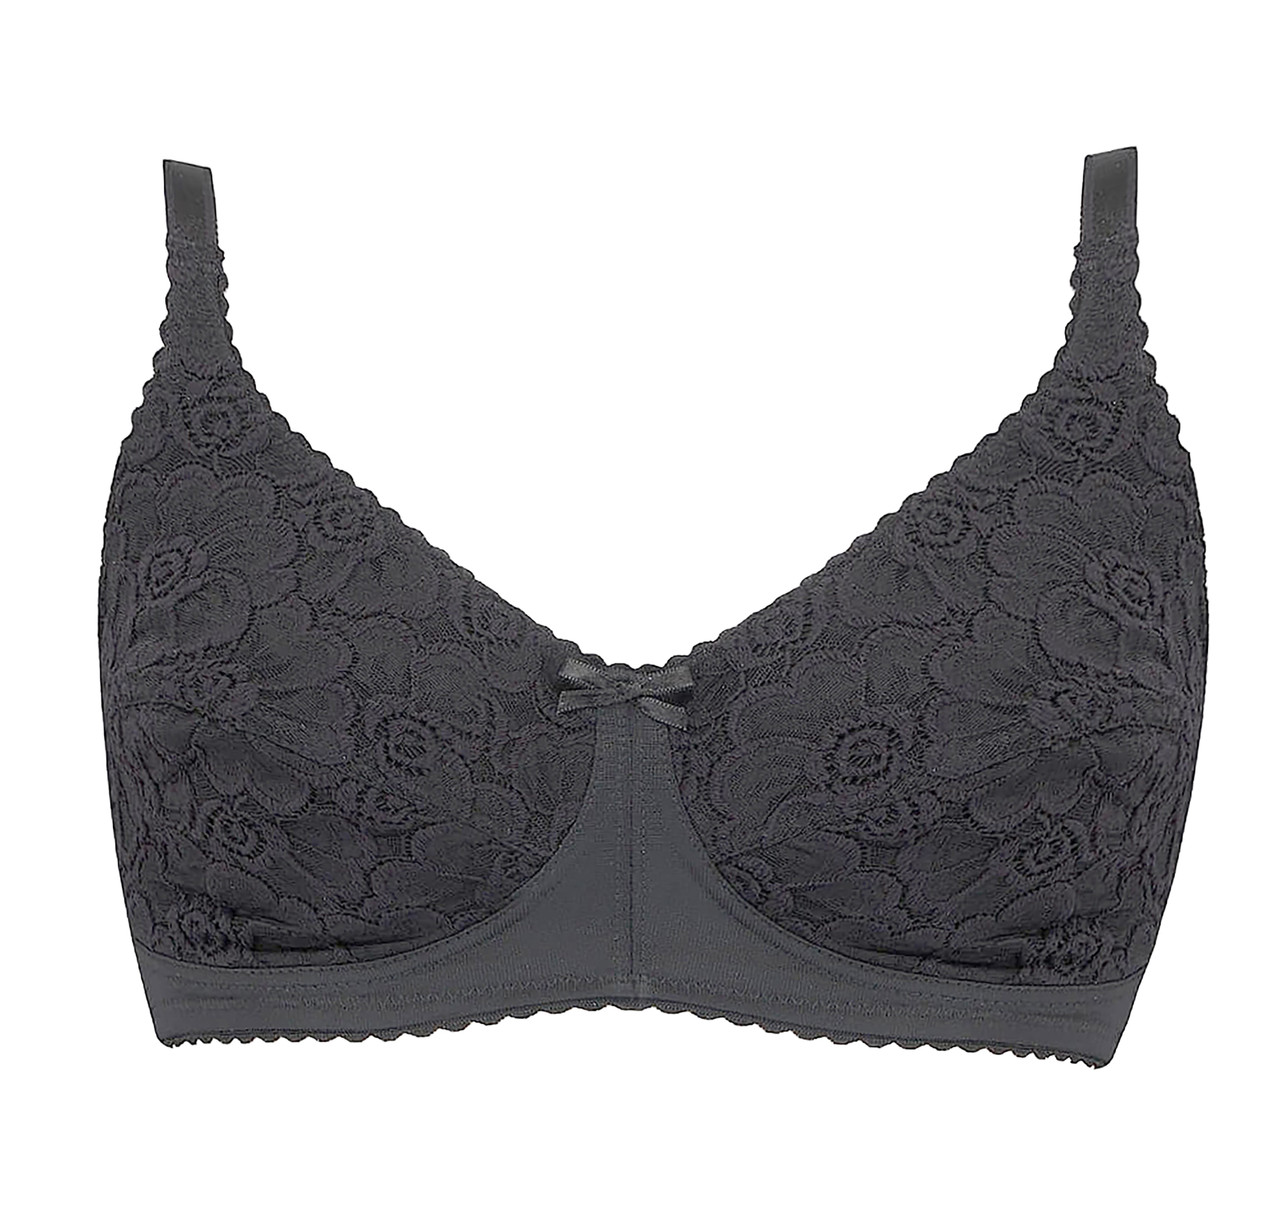 Women's Mastectomy Bra With Invisible Pockets